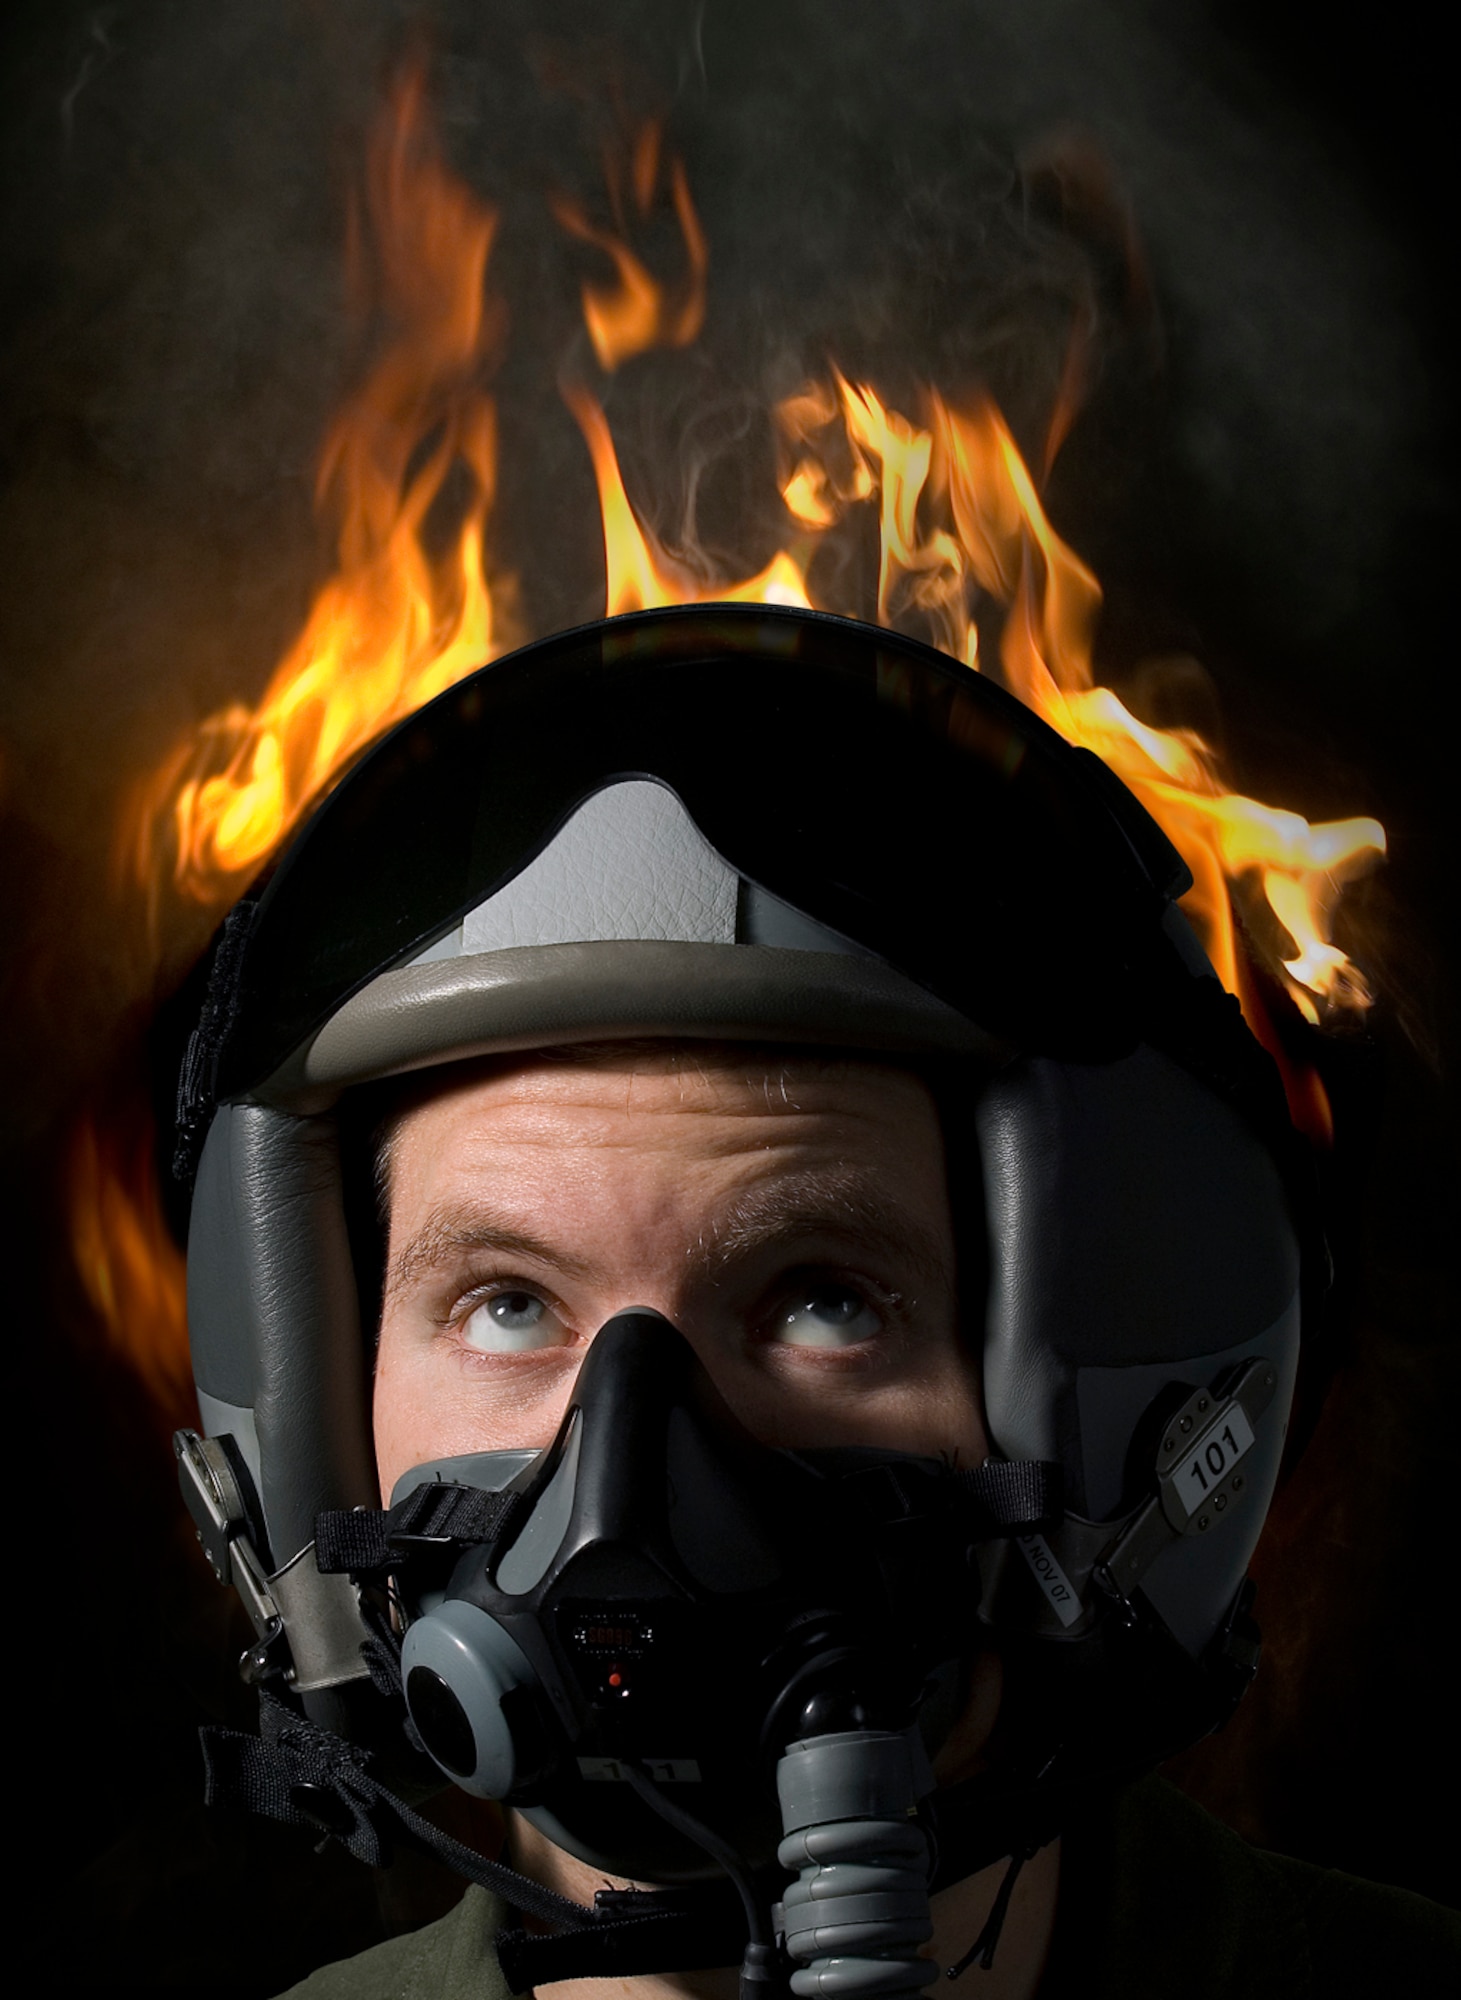 ‘Helmet fires’ (otherwise known as task saturation, mis-prioritization, situational awareness and channelized attention) can get the best of us, resulting in mishaps. (photo by Tech. Sgt. Matthew Hannen / composite by David M. Stack)